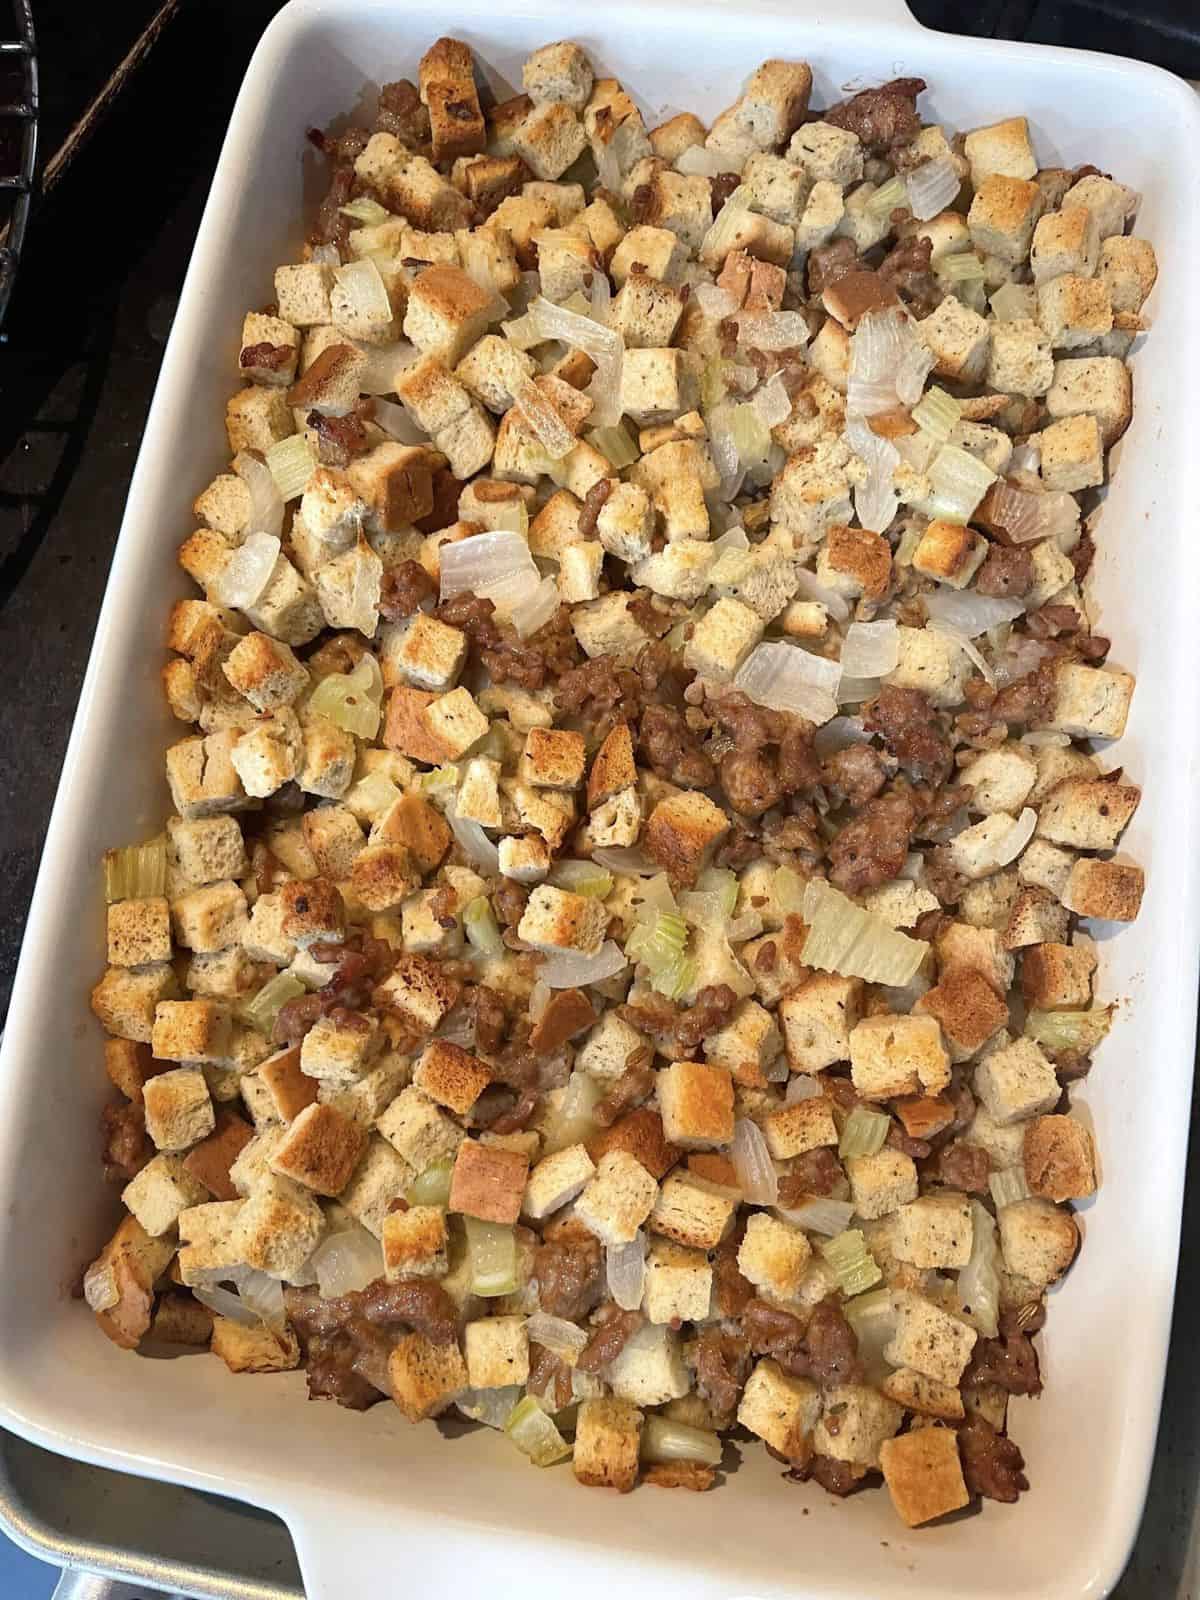 A white pan of cooked homemade stuffing.